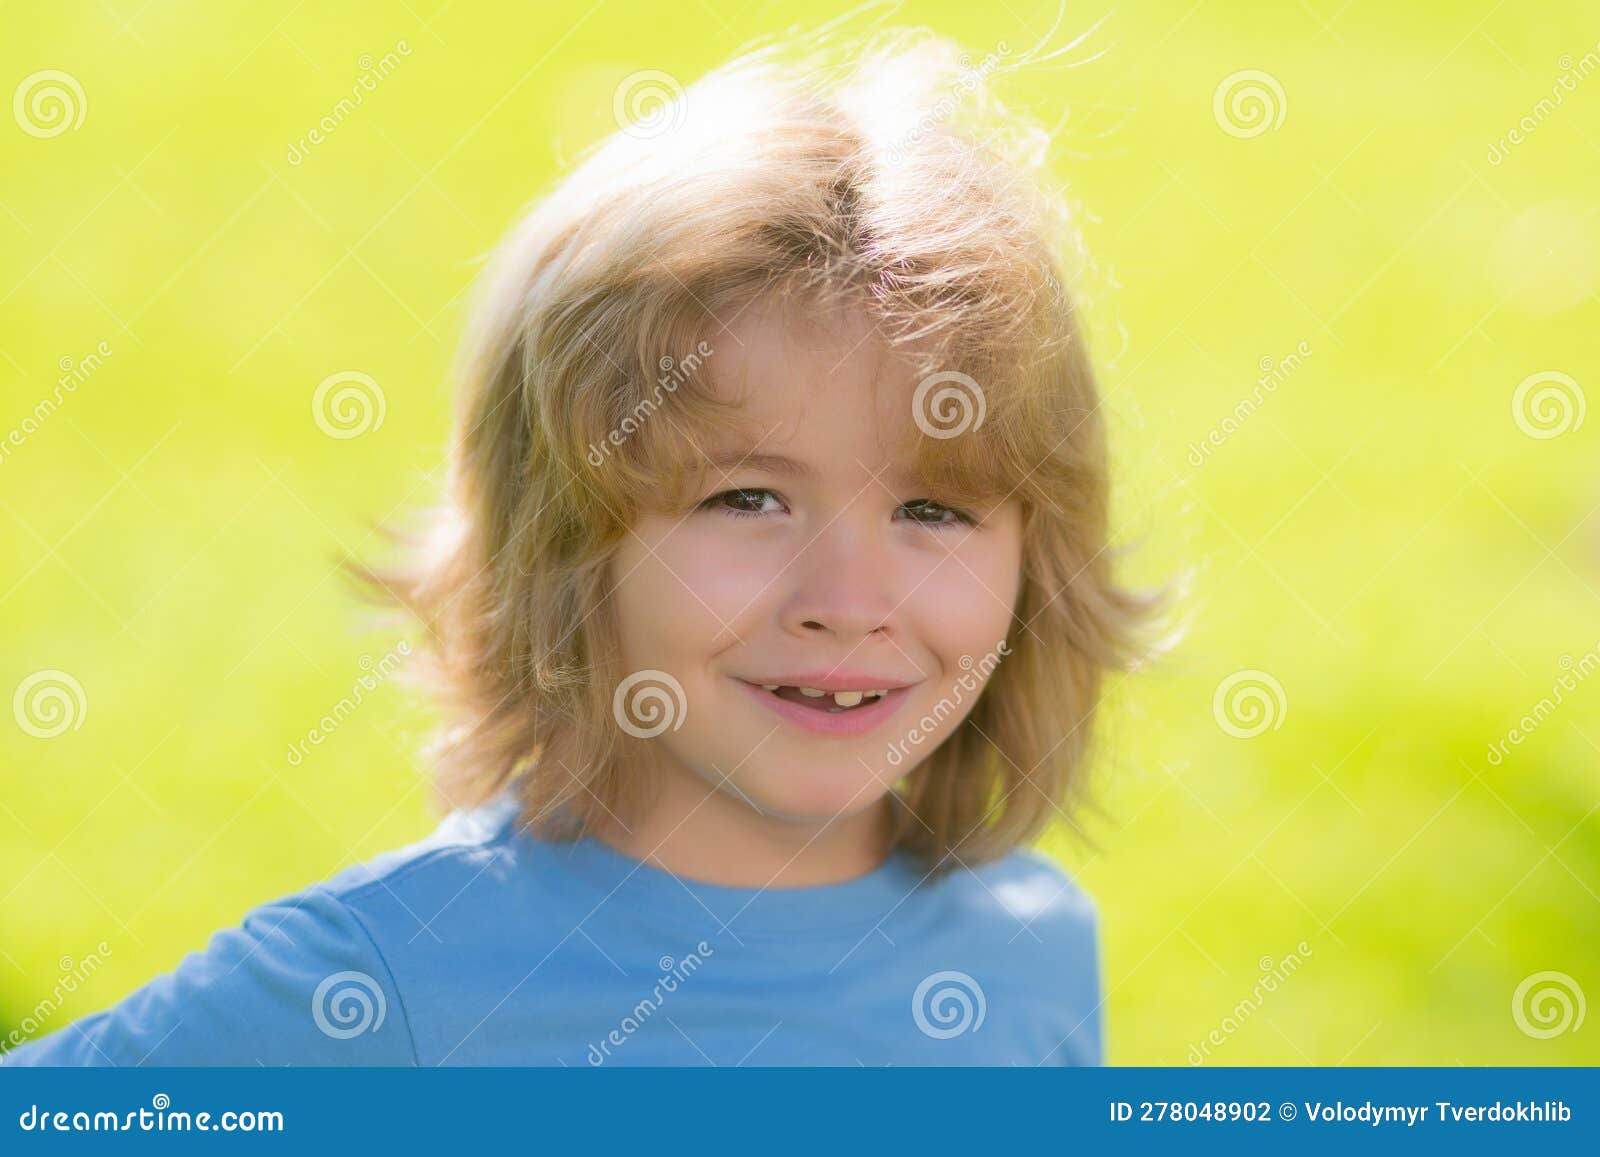 Cute Funny Blonde Little Child Close Up Portrait on Green Grass ...